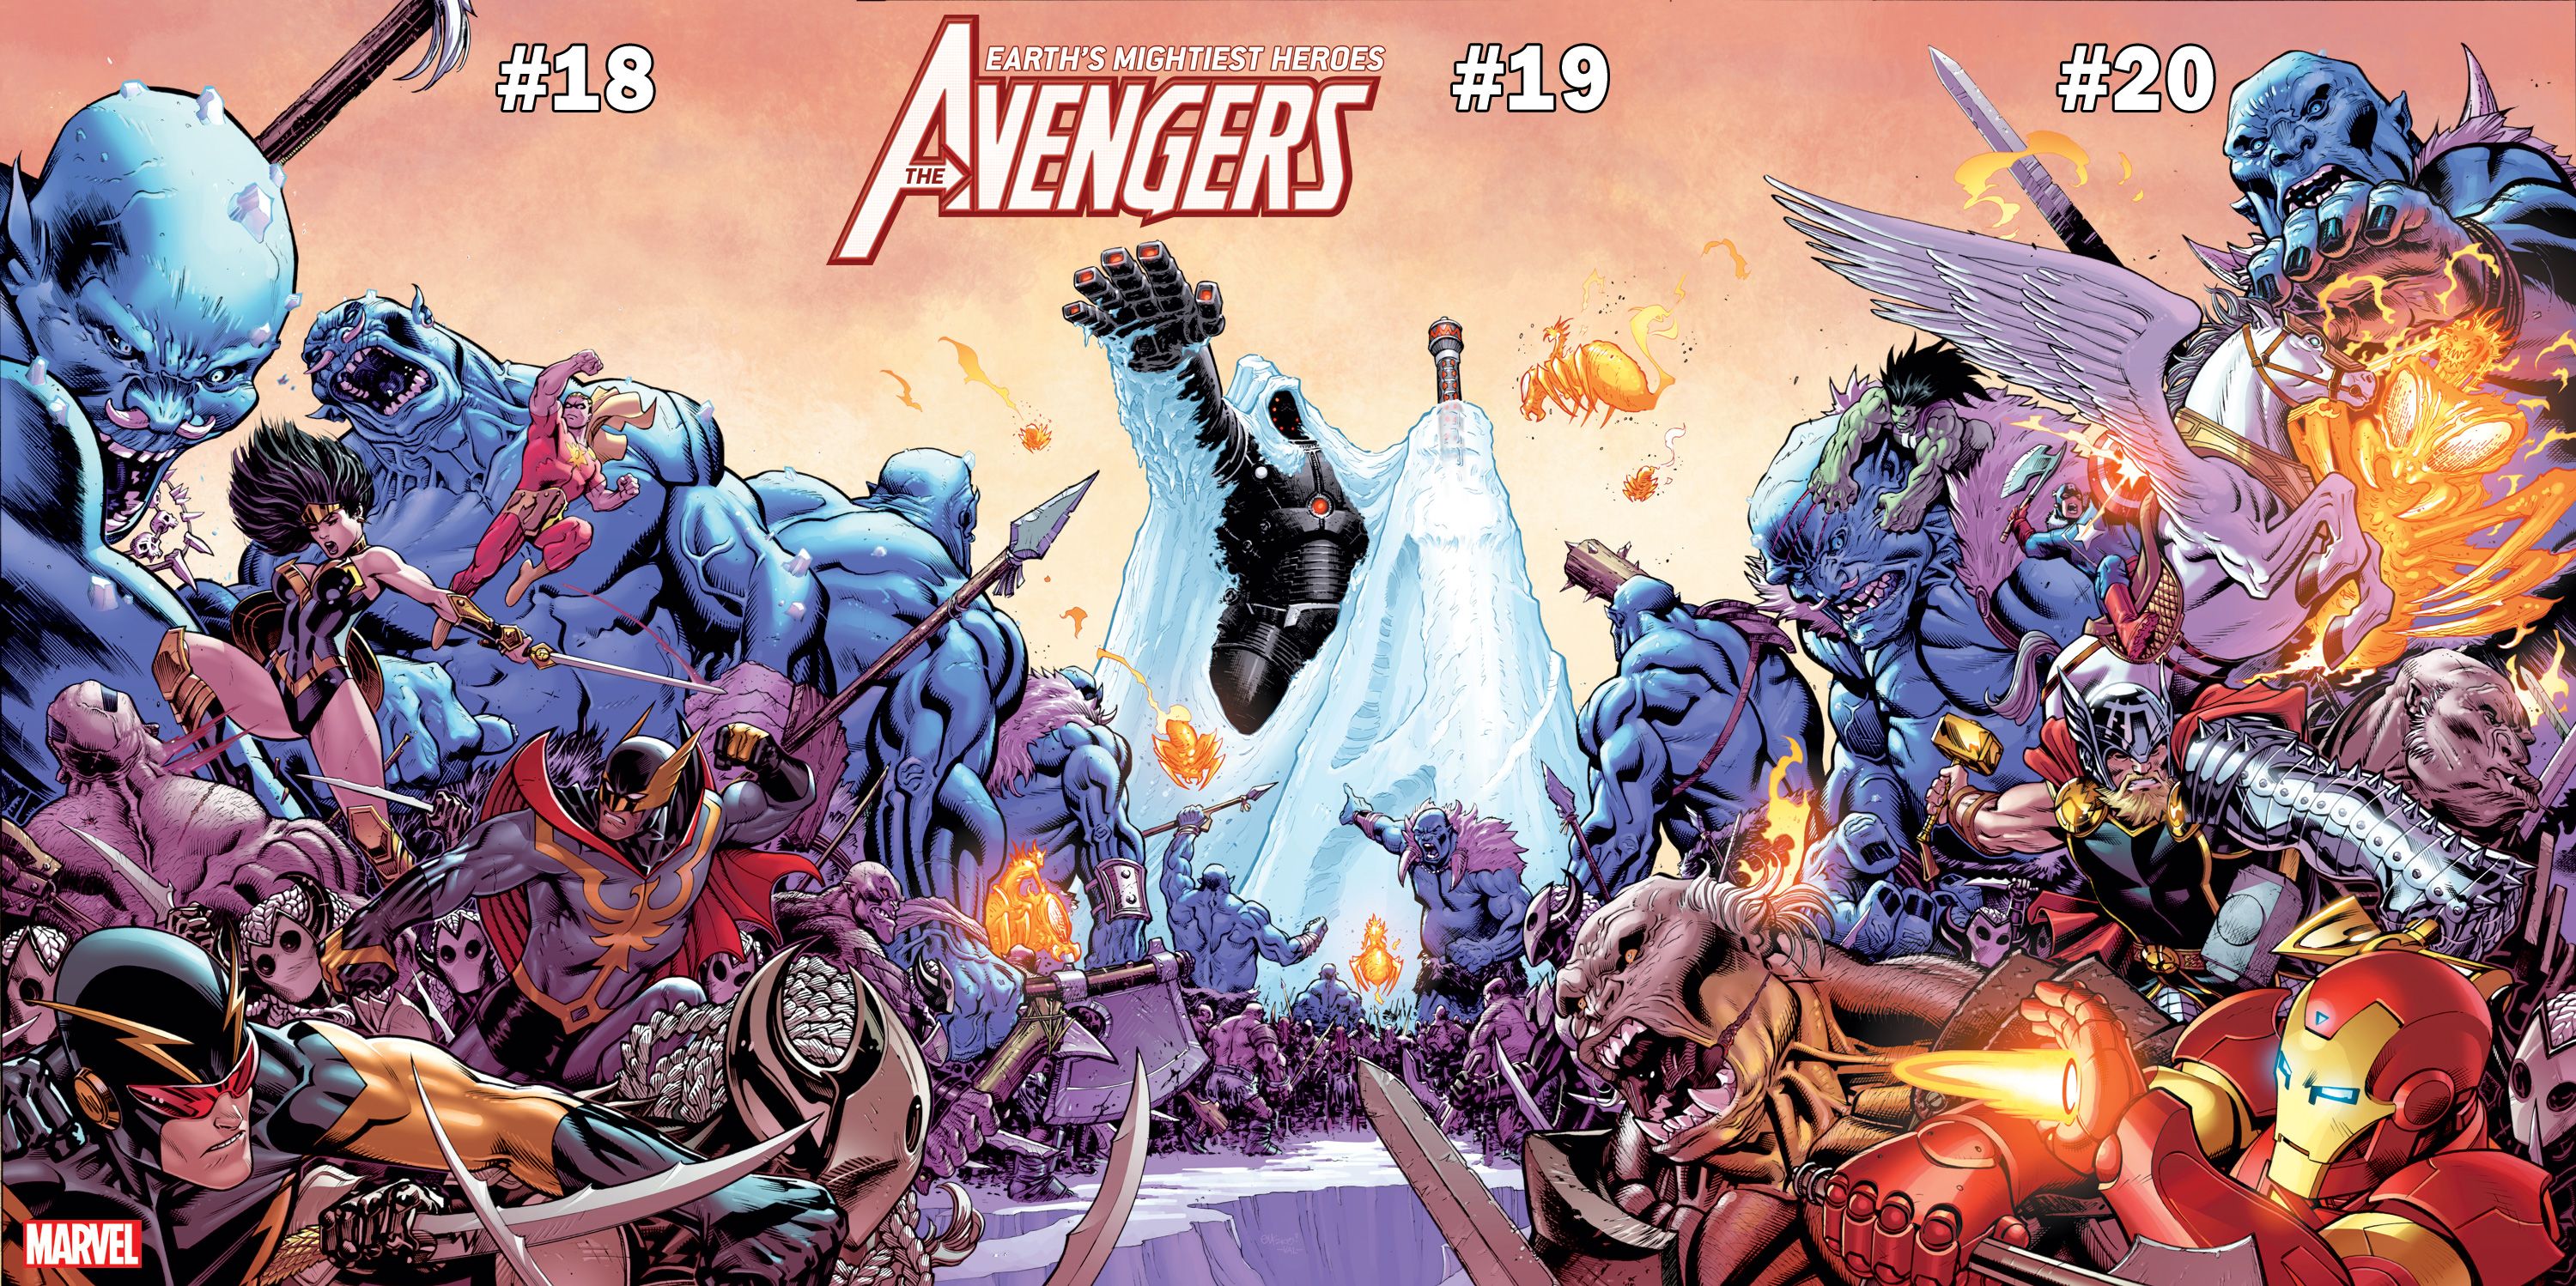 Avengers Join The Battle in "War of the Realms" Tie-In